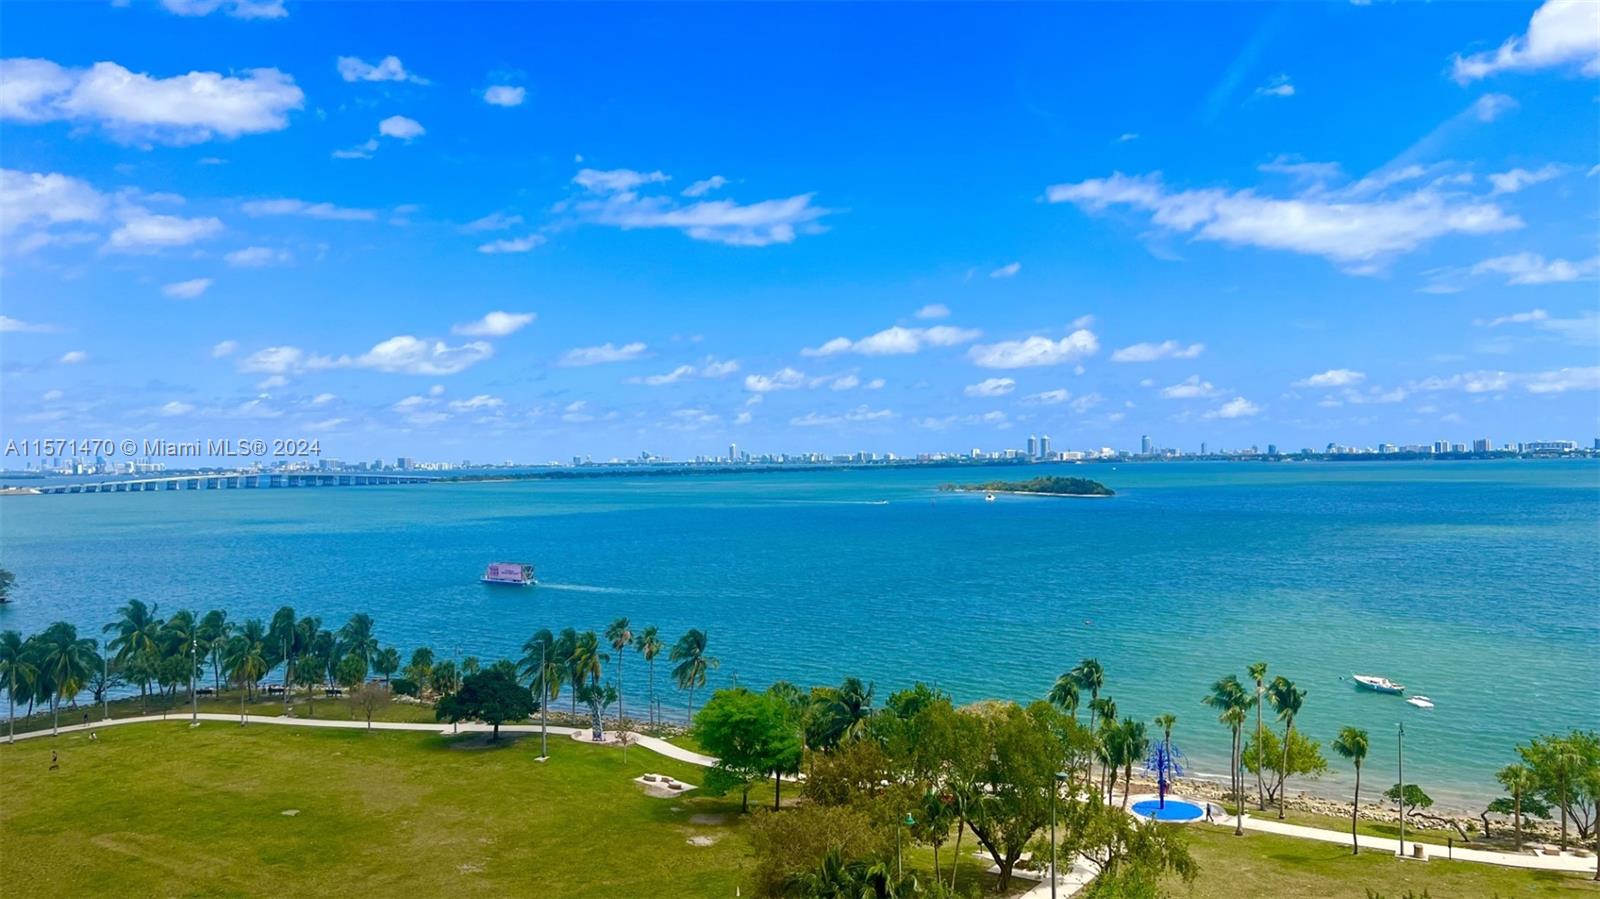 Amazing luxury condo with spectacular water views of Biscayne Bay and overlooking Margaret Pace Park. 14 ft ceilings. This apartment has 1 bedroom + den + 2 bathrooms with a large 400 sqft terrace. The property is exquisitely furnished and decorated. The building has many amenities: gym, pools, sauna, valet parking, concierge staff. All the amenities are on the 10th floor.